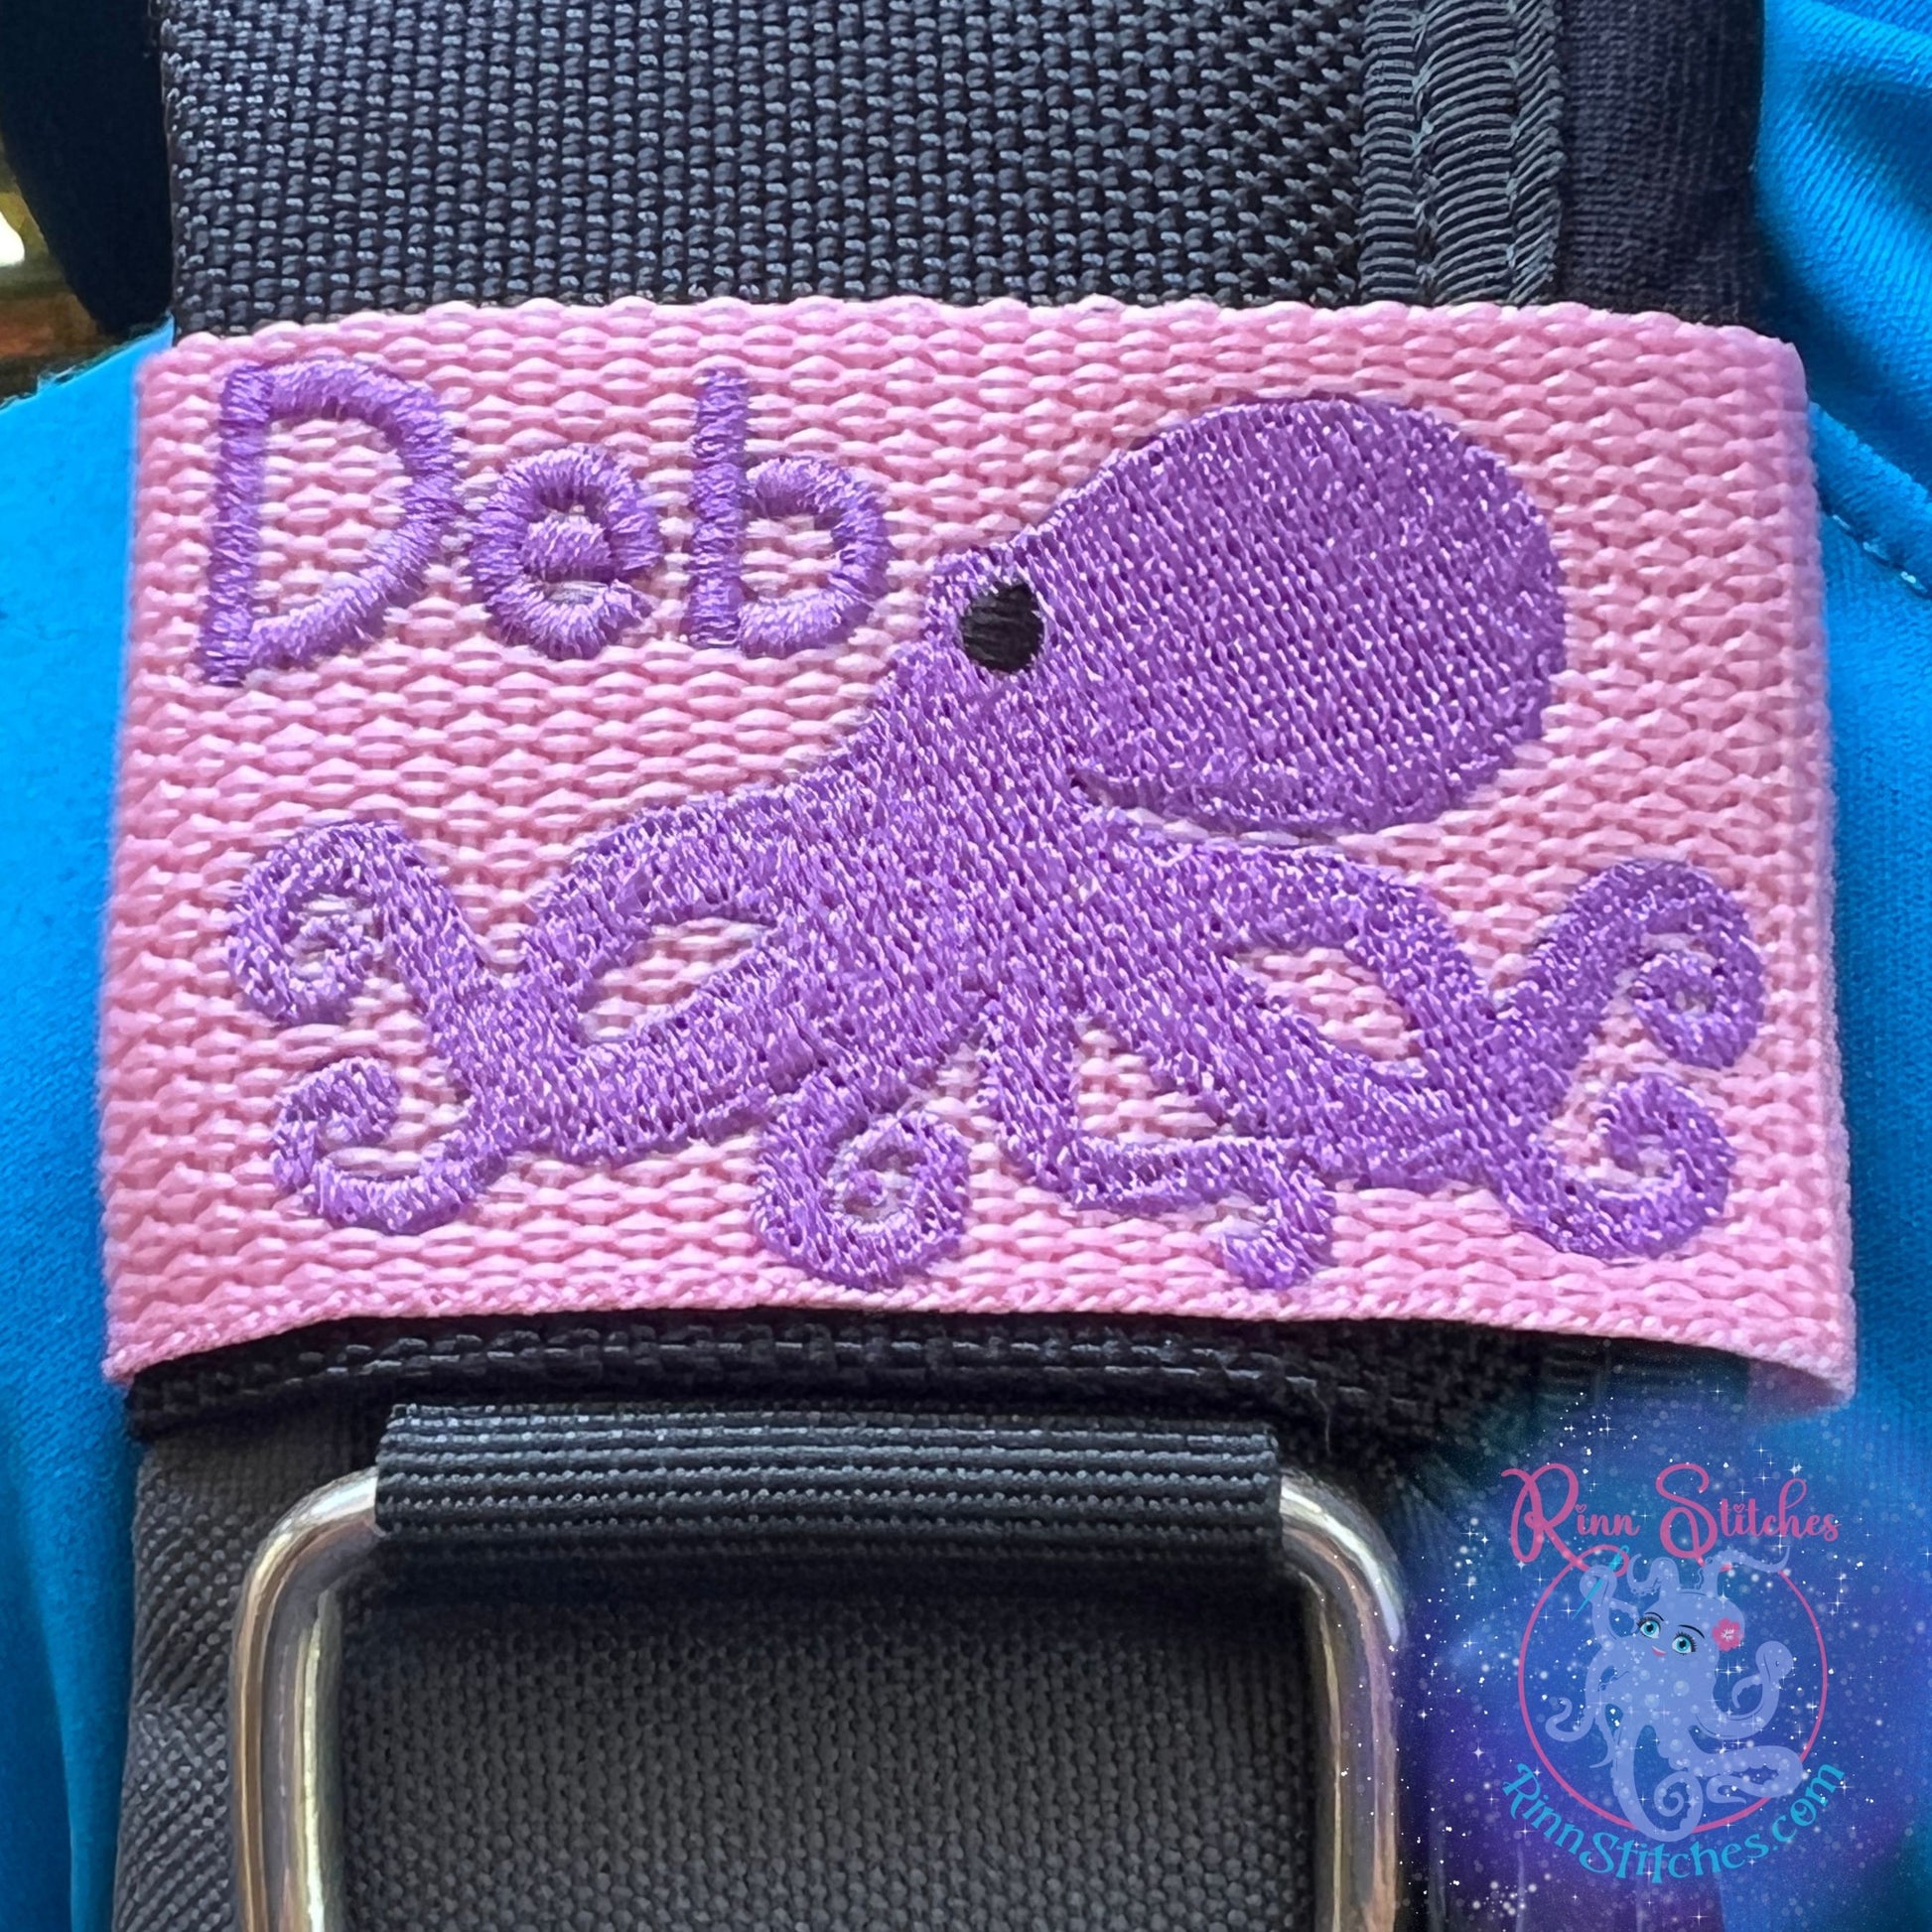 Tako (Octopus) | Personalized & Customizable Scuba Diver BCD Identification Tag | Made on Maui | Scuba Diver Gift | Rinn Stitches Creative & Unique Embroidery - Pink Webbing